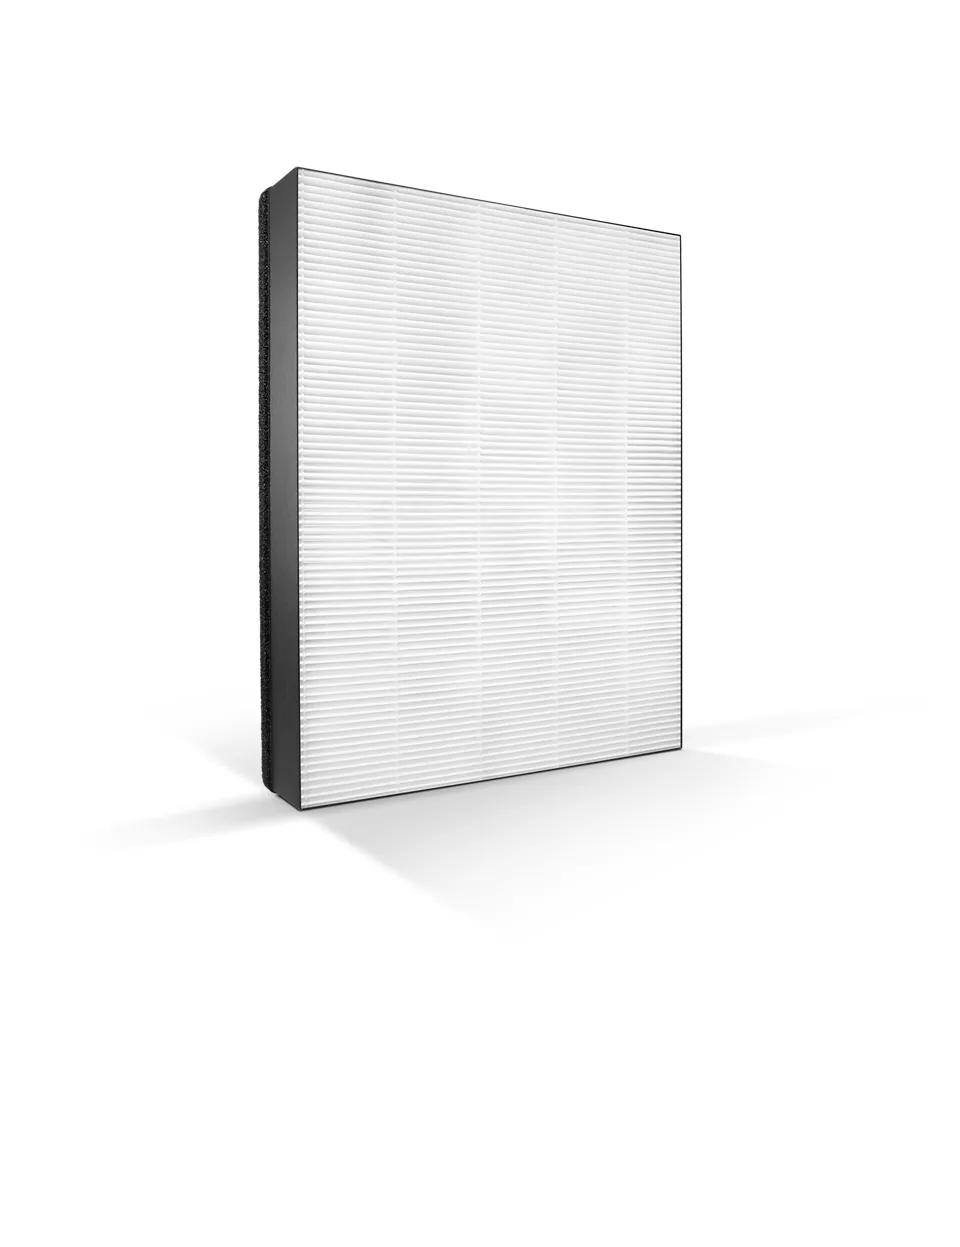 Philips NanoProtect HEPA filter FY1410 / 10 for Air Purifier AC1210 AC1211 AC1213 AC1214 AC1215 AC1217